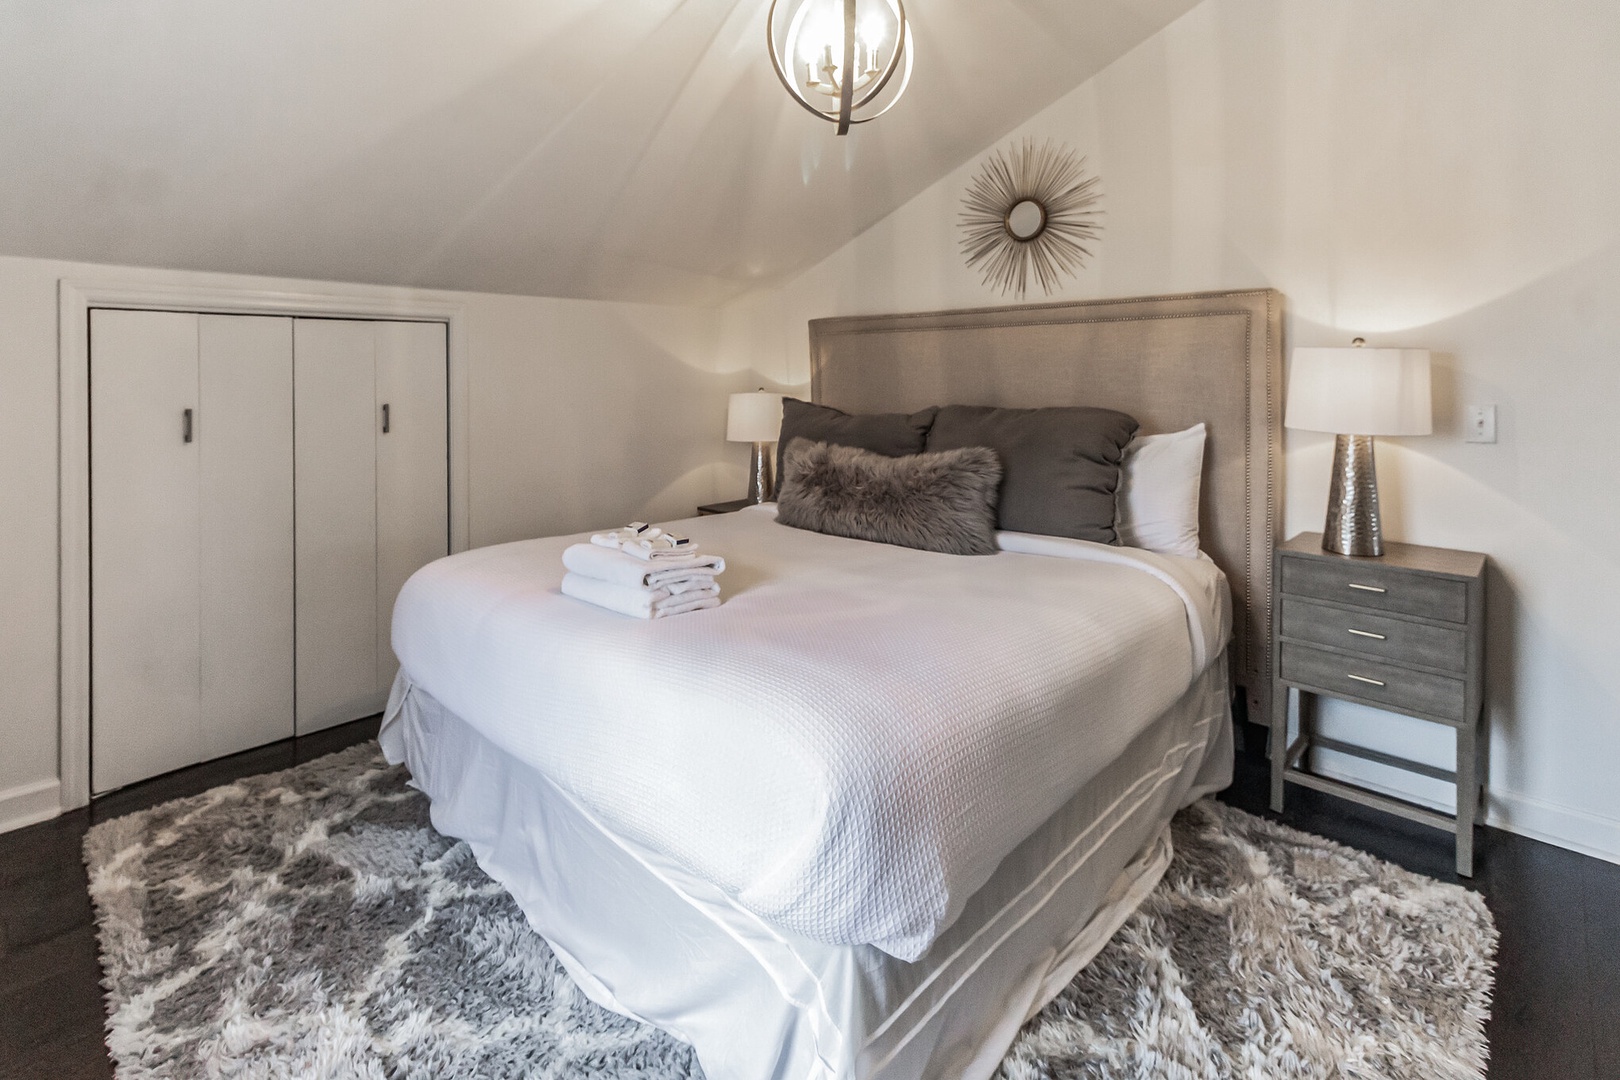 Unit C2: The elegant private bedroom offers a king bed & Smart TV